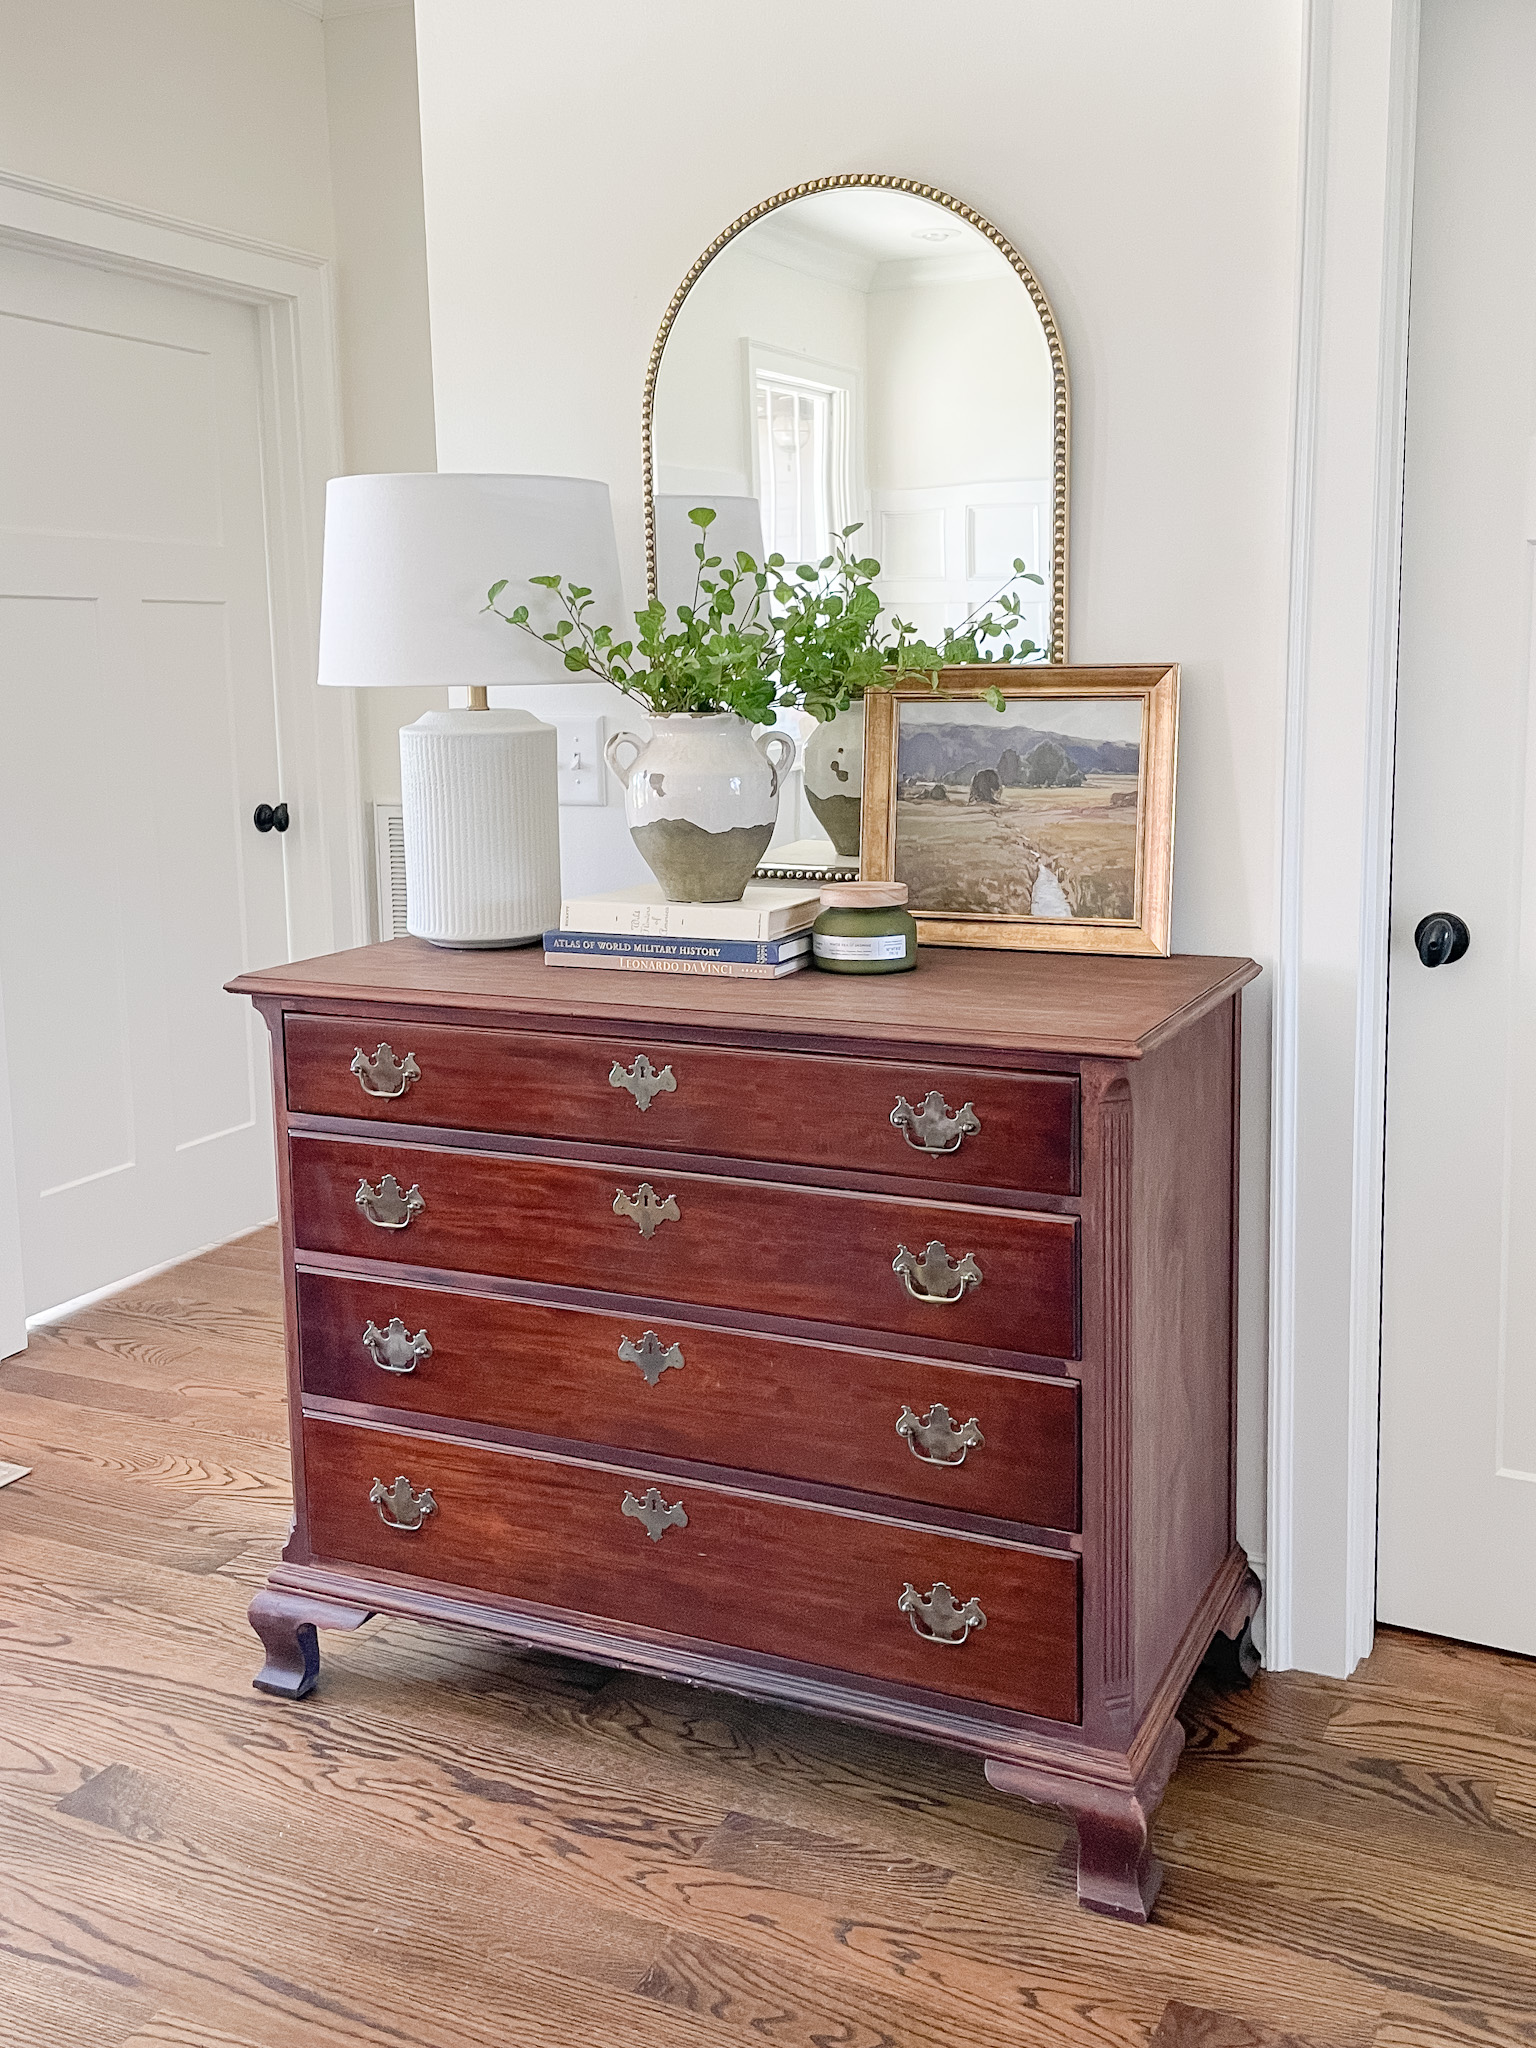 Mahogany dresser with mirror and lamp